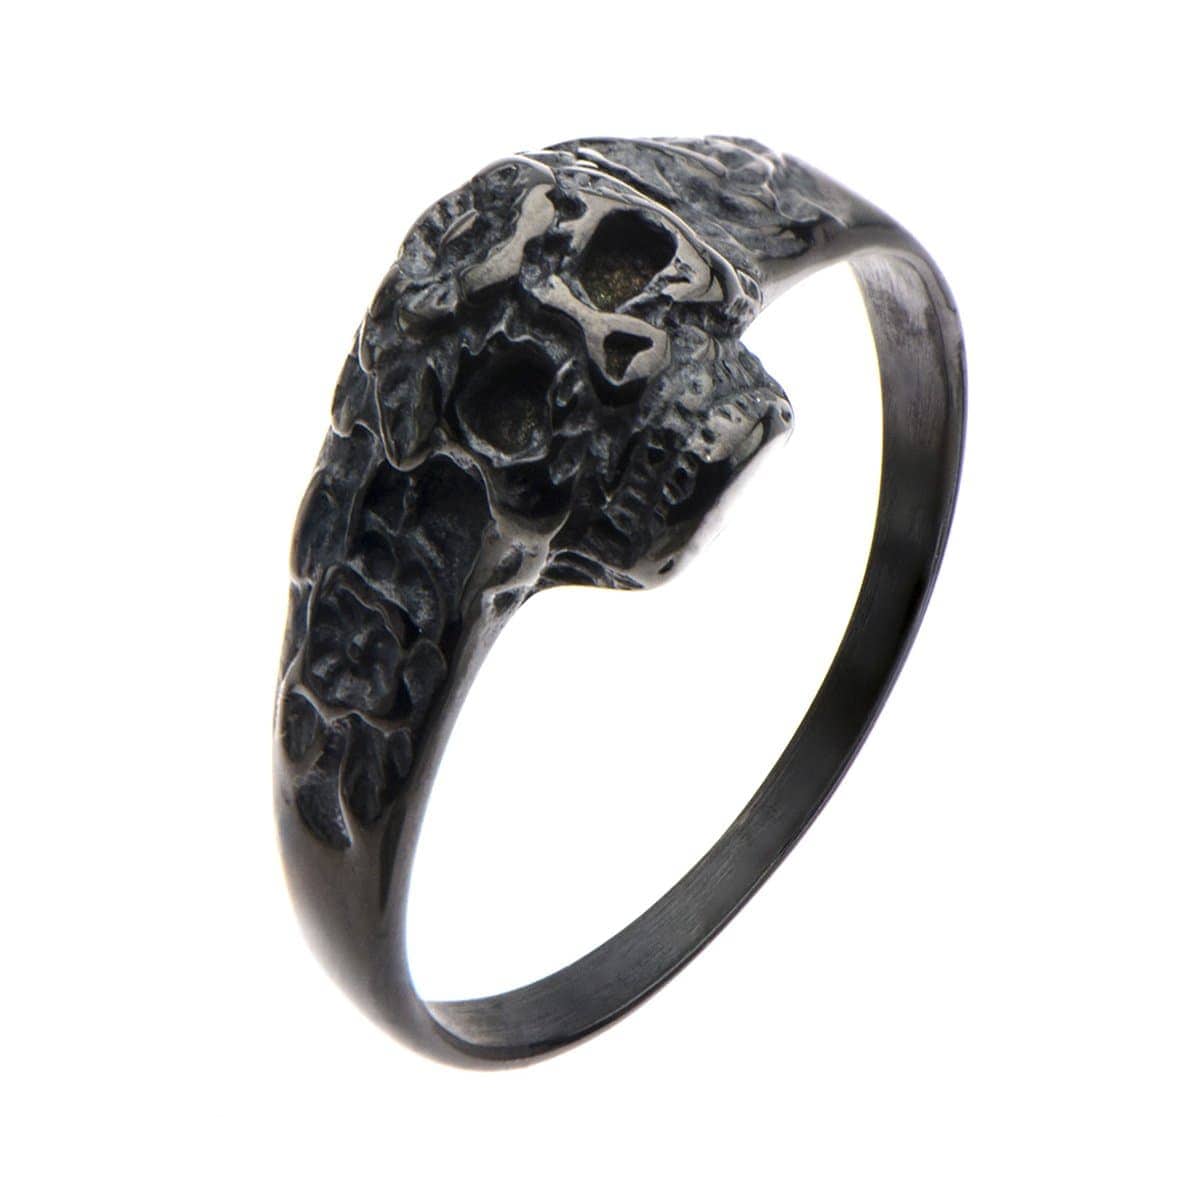 INOX JEWELRY Rings Black Stainless Steel Skull with Carved Flowers Ring